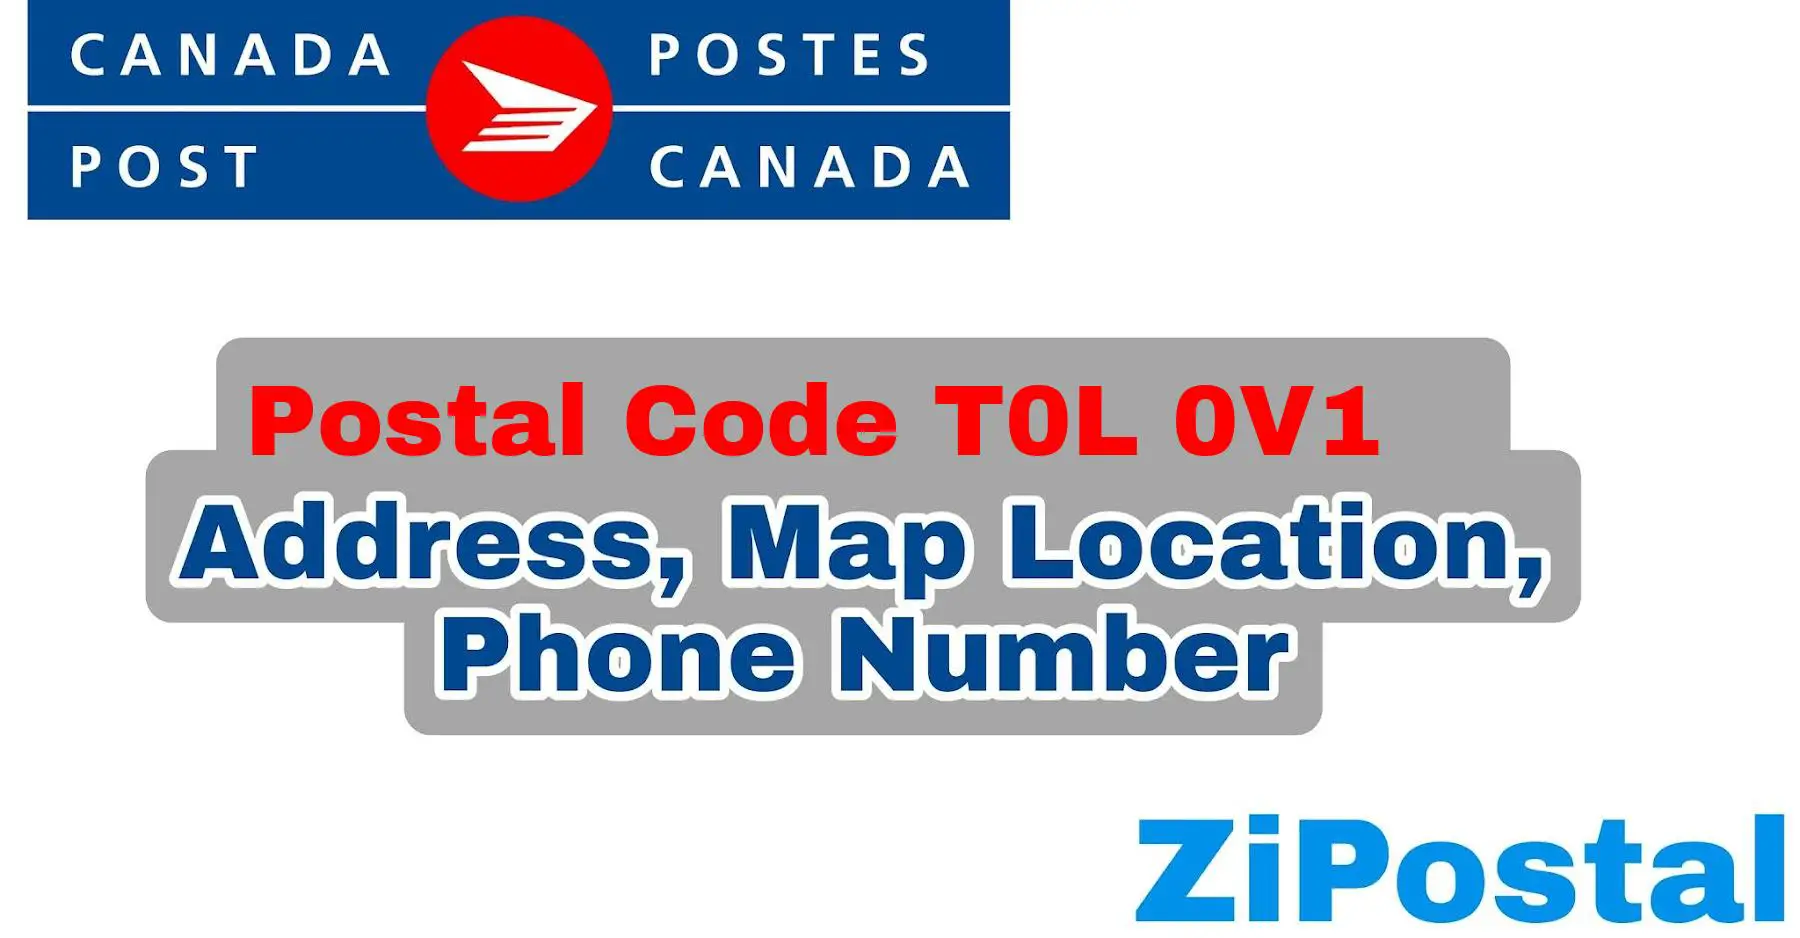 Postal Code T0L 0V1 Address Map Location and Phone Number